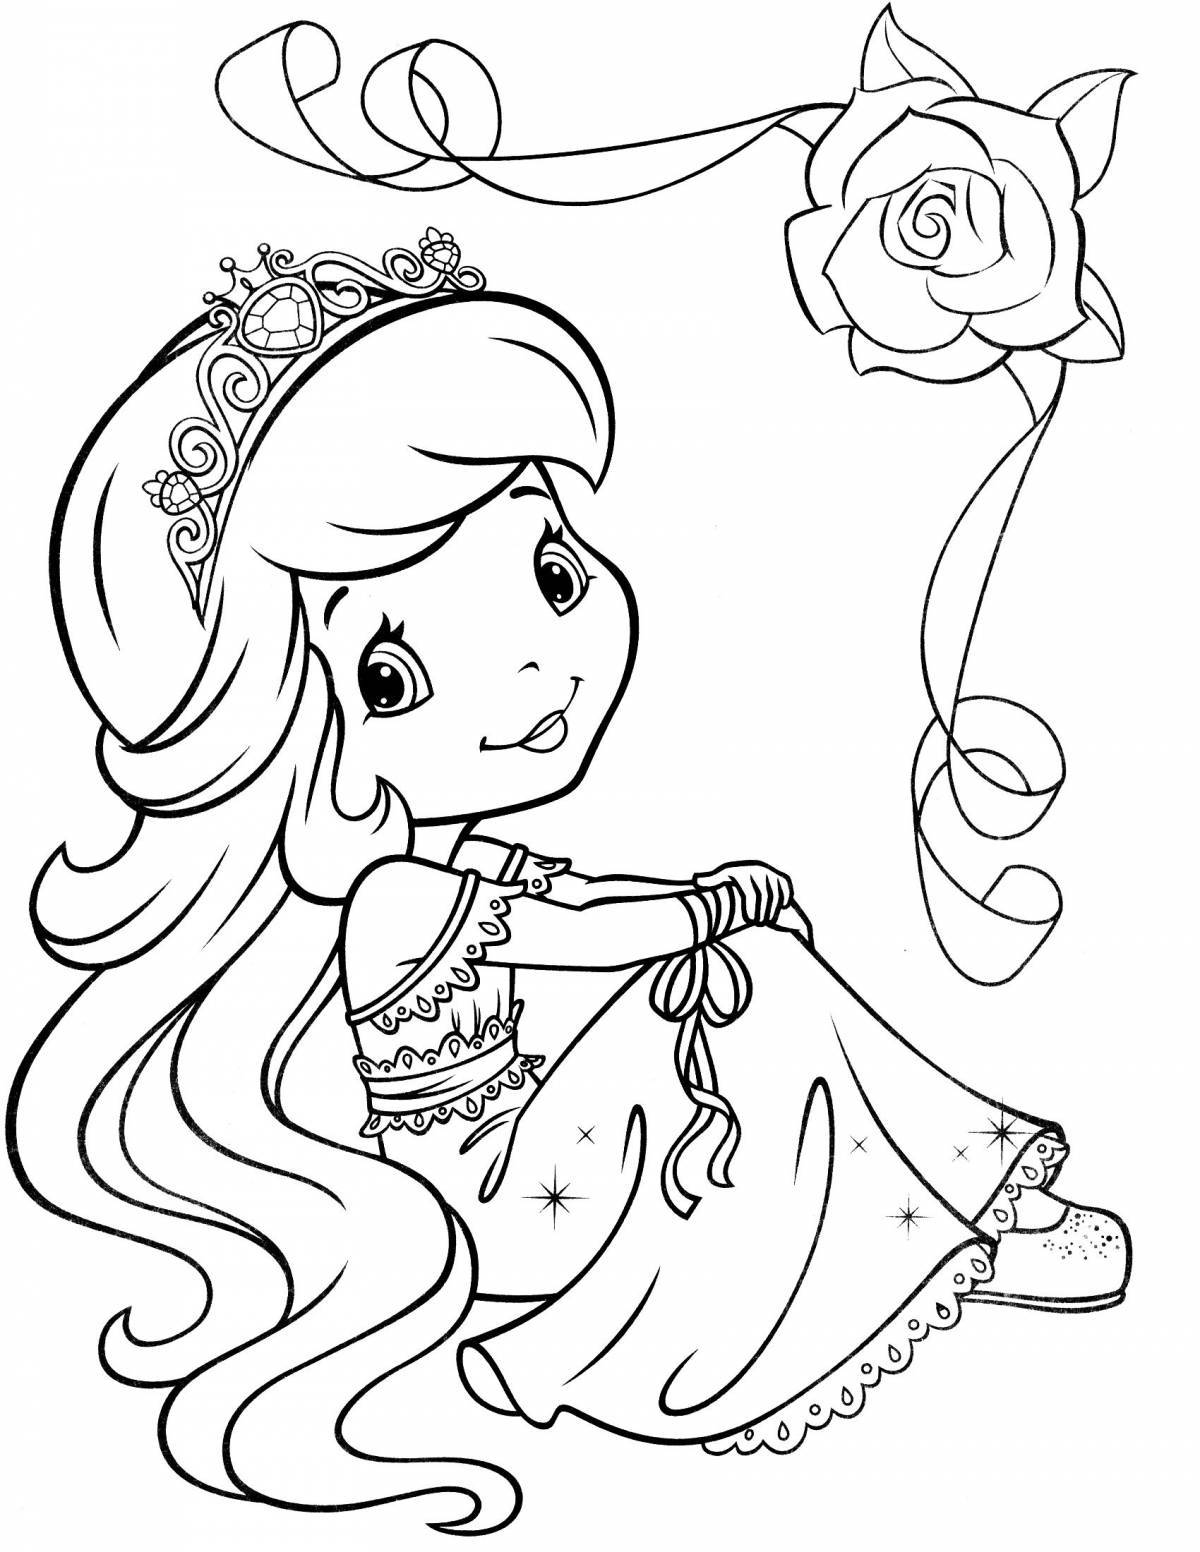 Bright coloring princess for children 5-6 years old